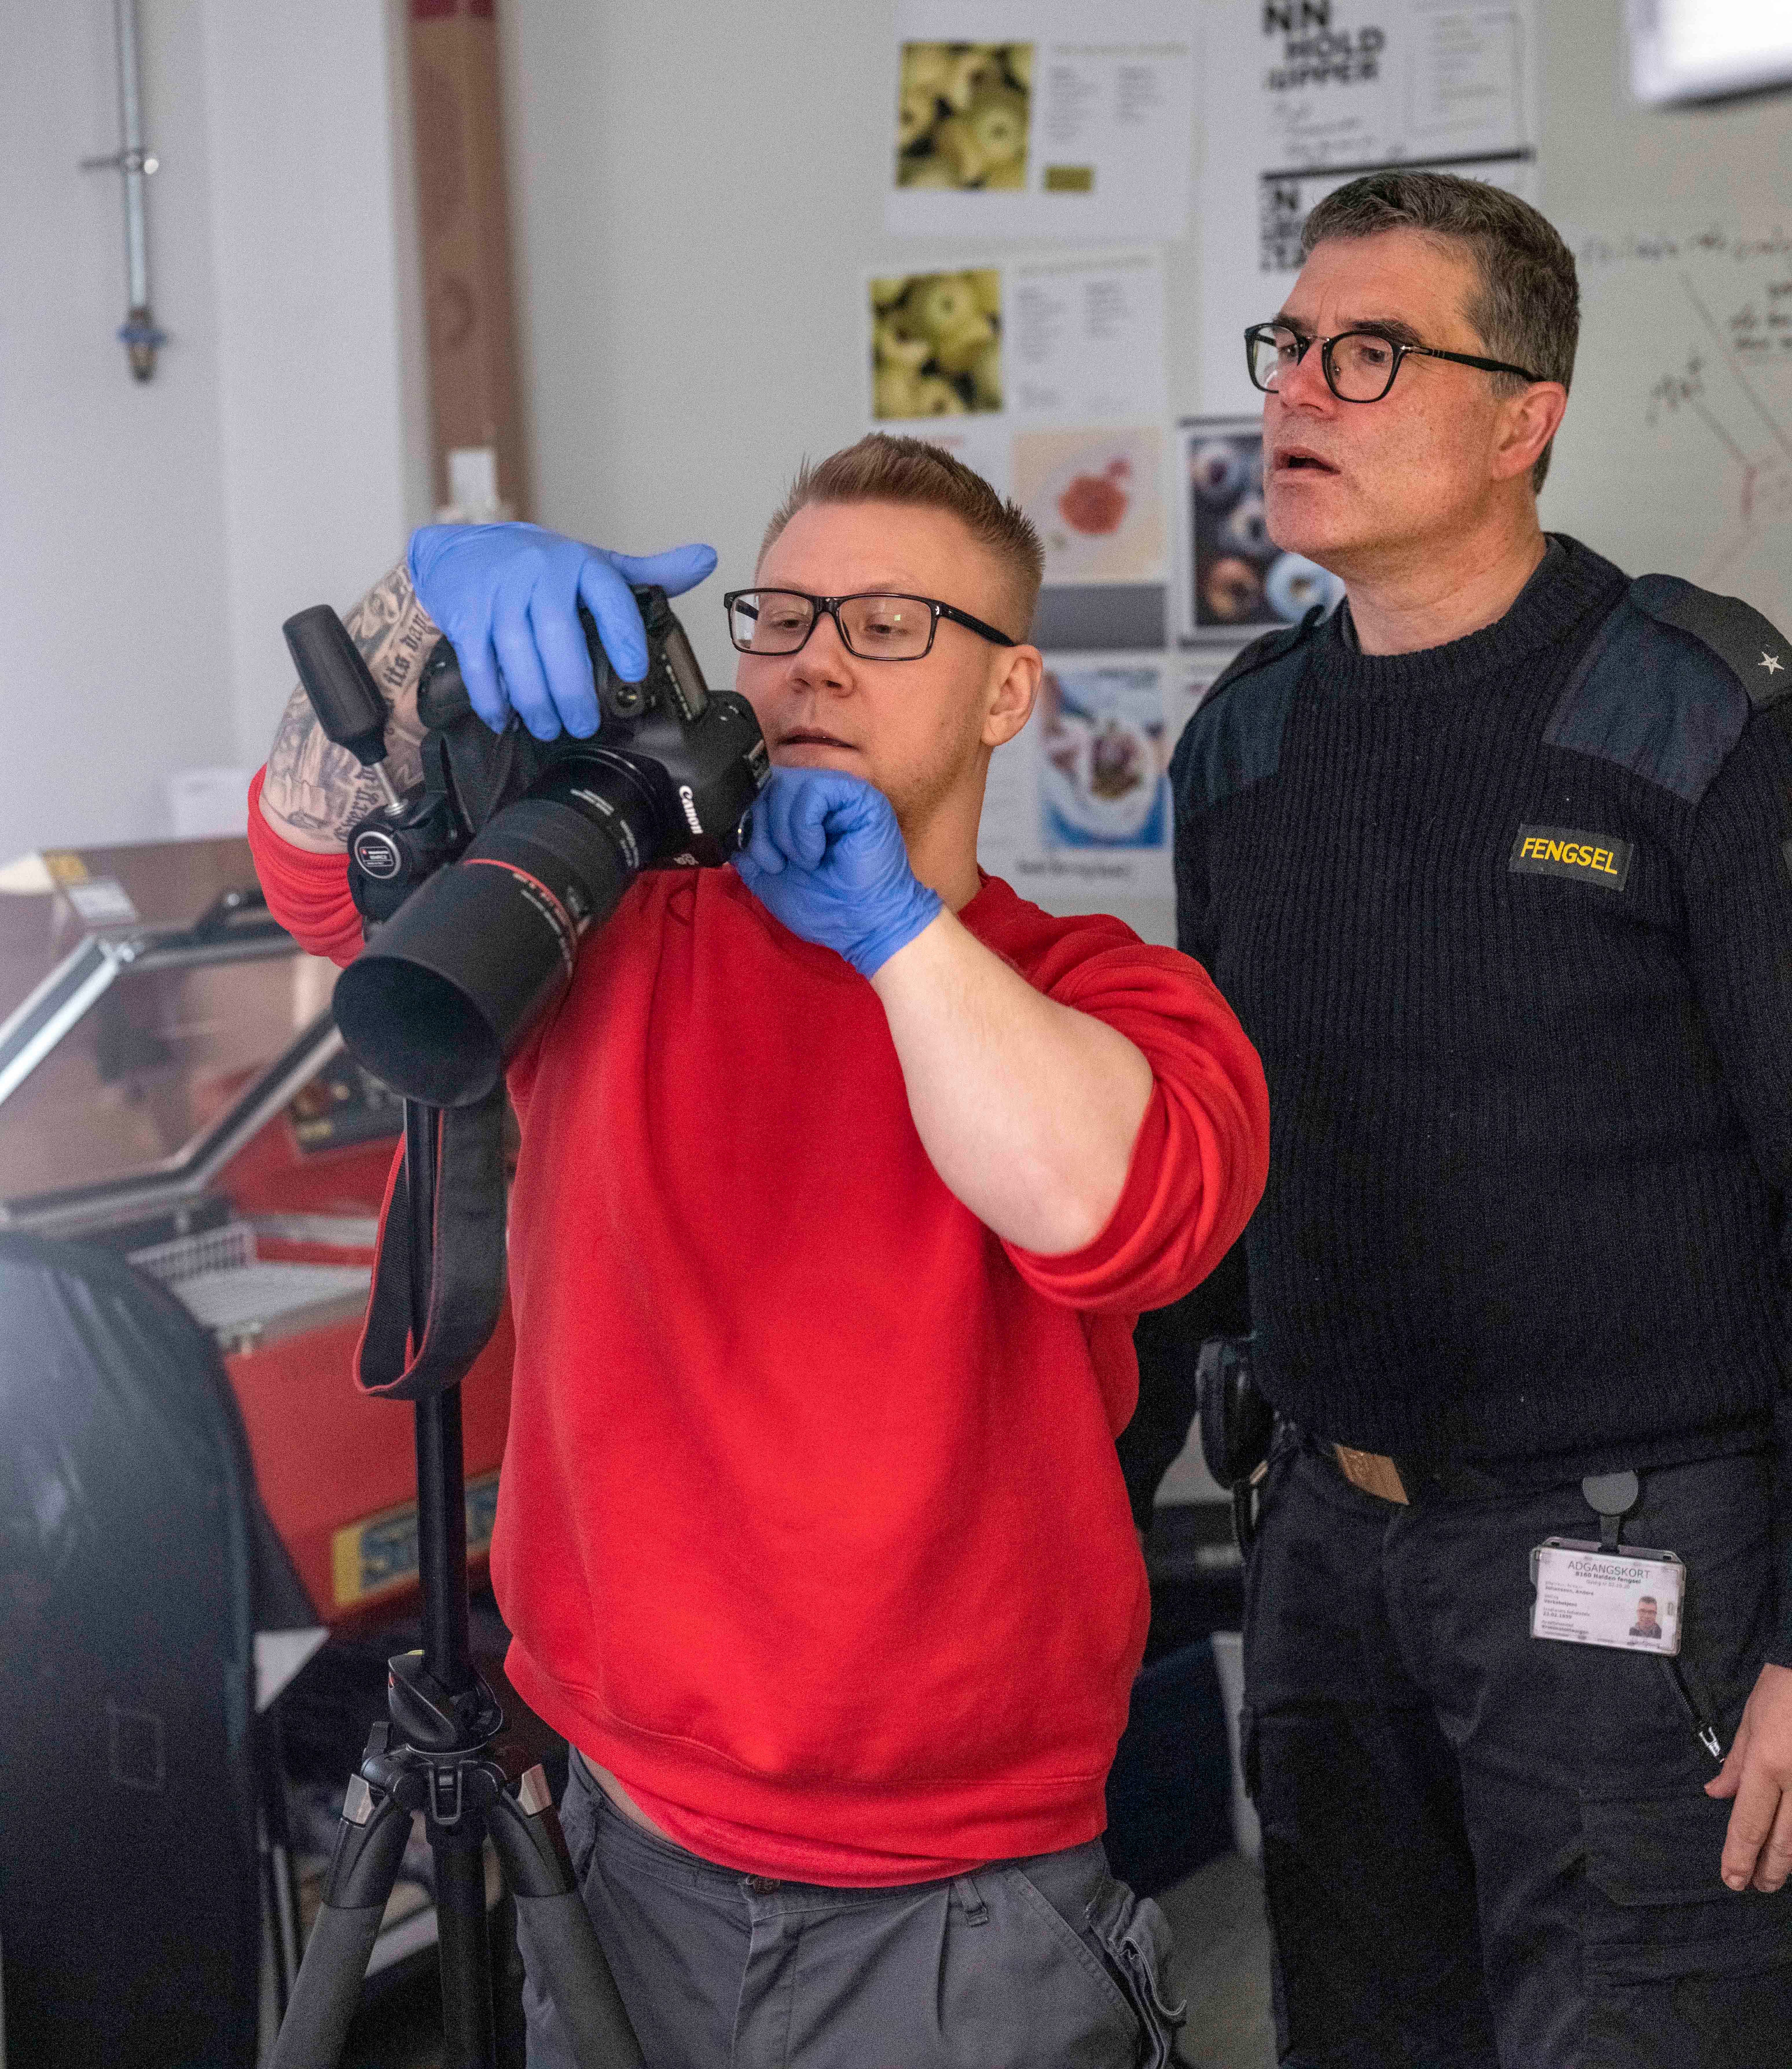 Inmate Kim, left, and works officer Anders Johansson prepare to shoot a photograph in the print shop at Halden Prison in Norway.